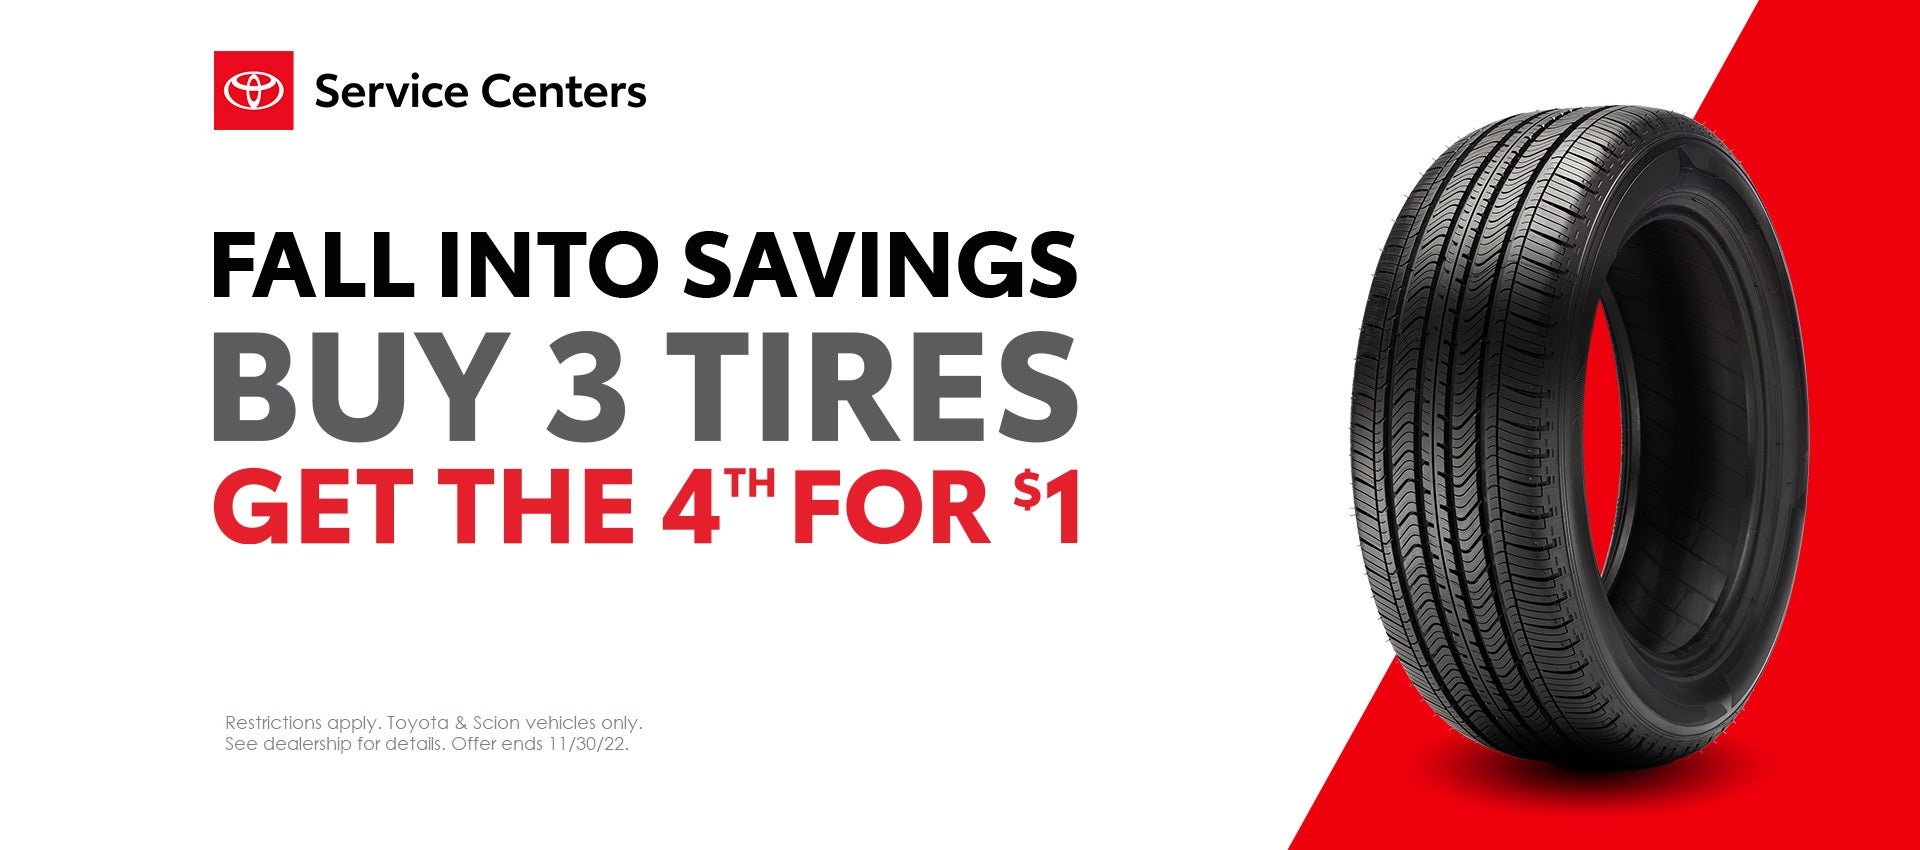 Buy 3 tires get the fourth for one dollar